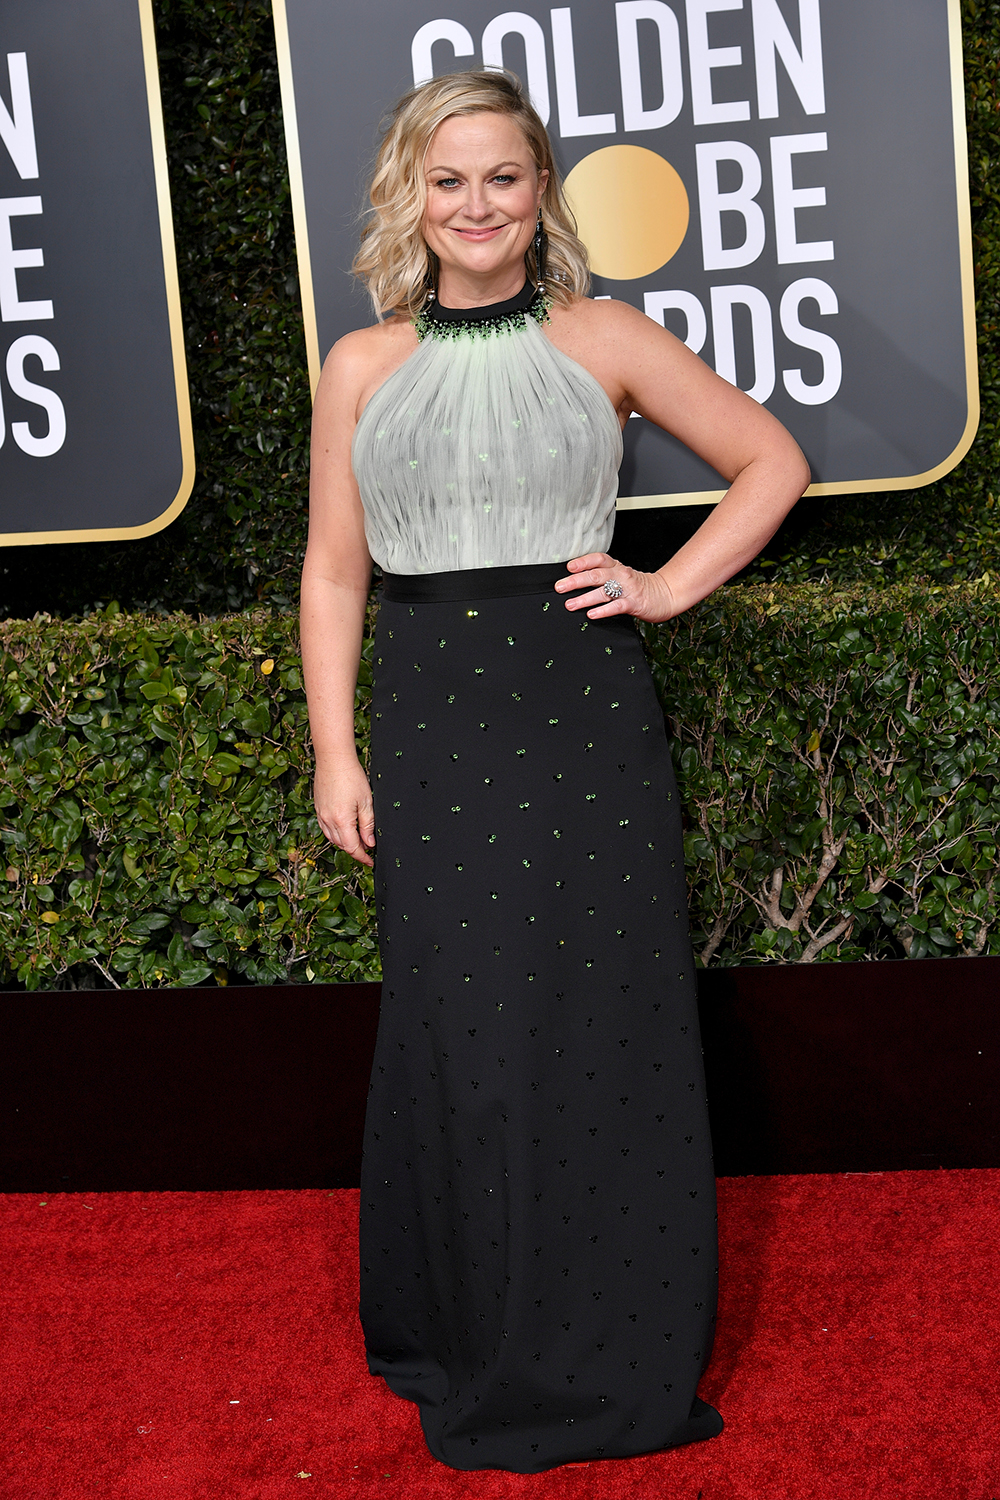 Mandatory Credit: Photo by Rob Latour/REX/Shutterstock (10048066lm) Amy Poehler 76th Annual Golden Globe Awards, Arrivals, Los Angeles, USA - 06 Jan 2019